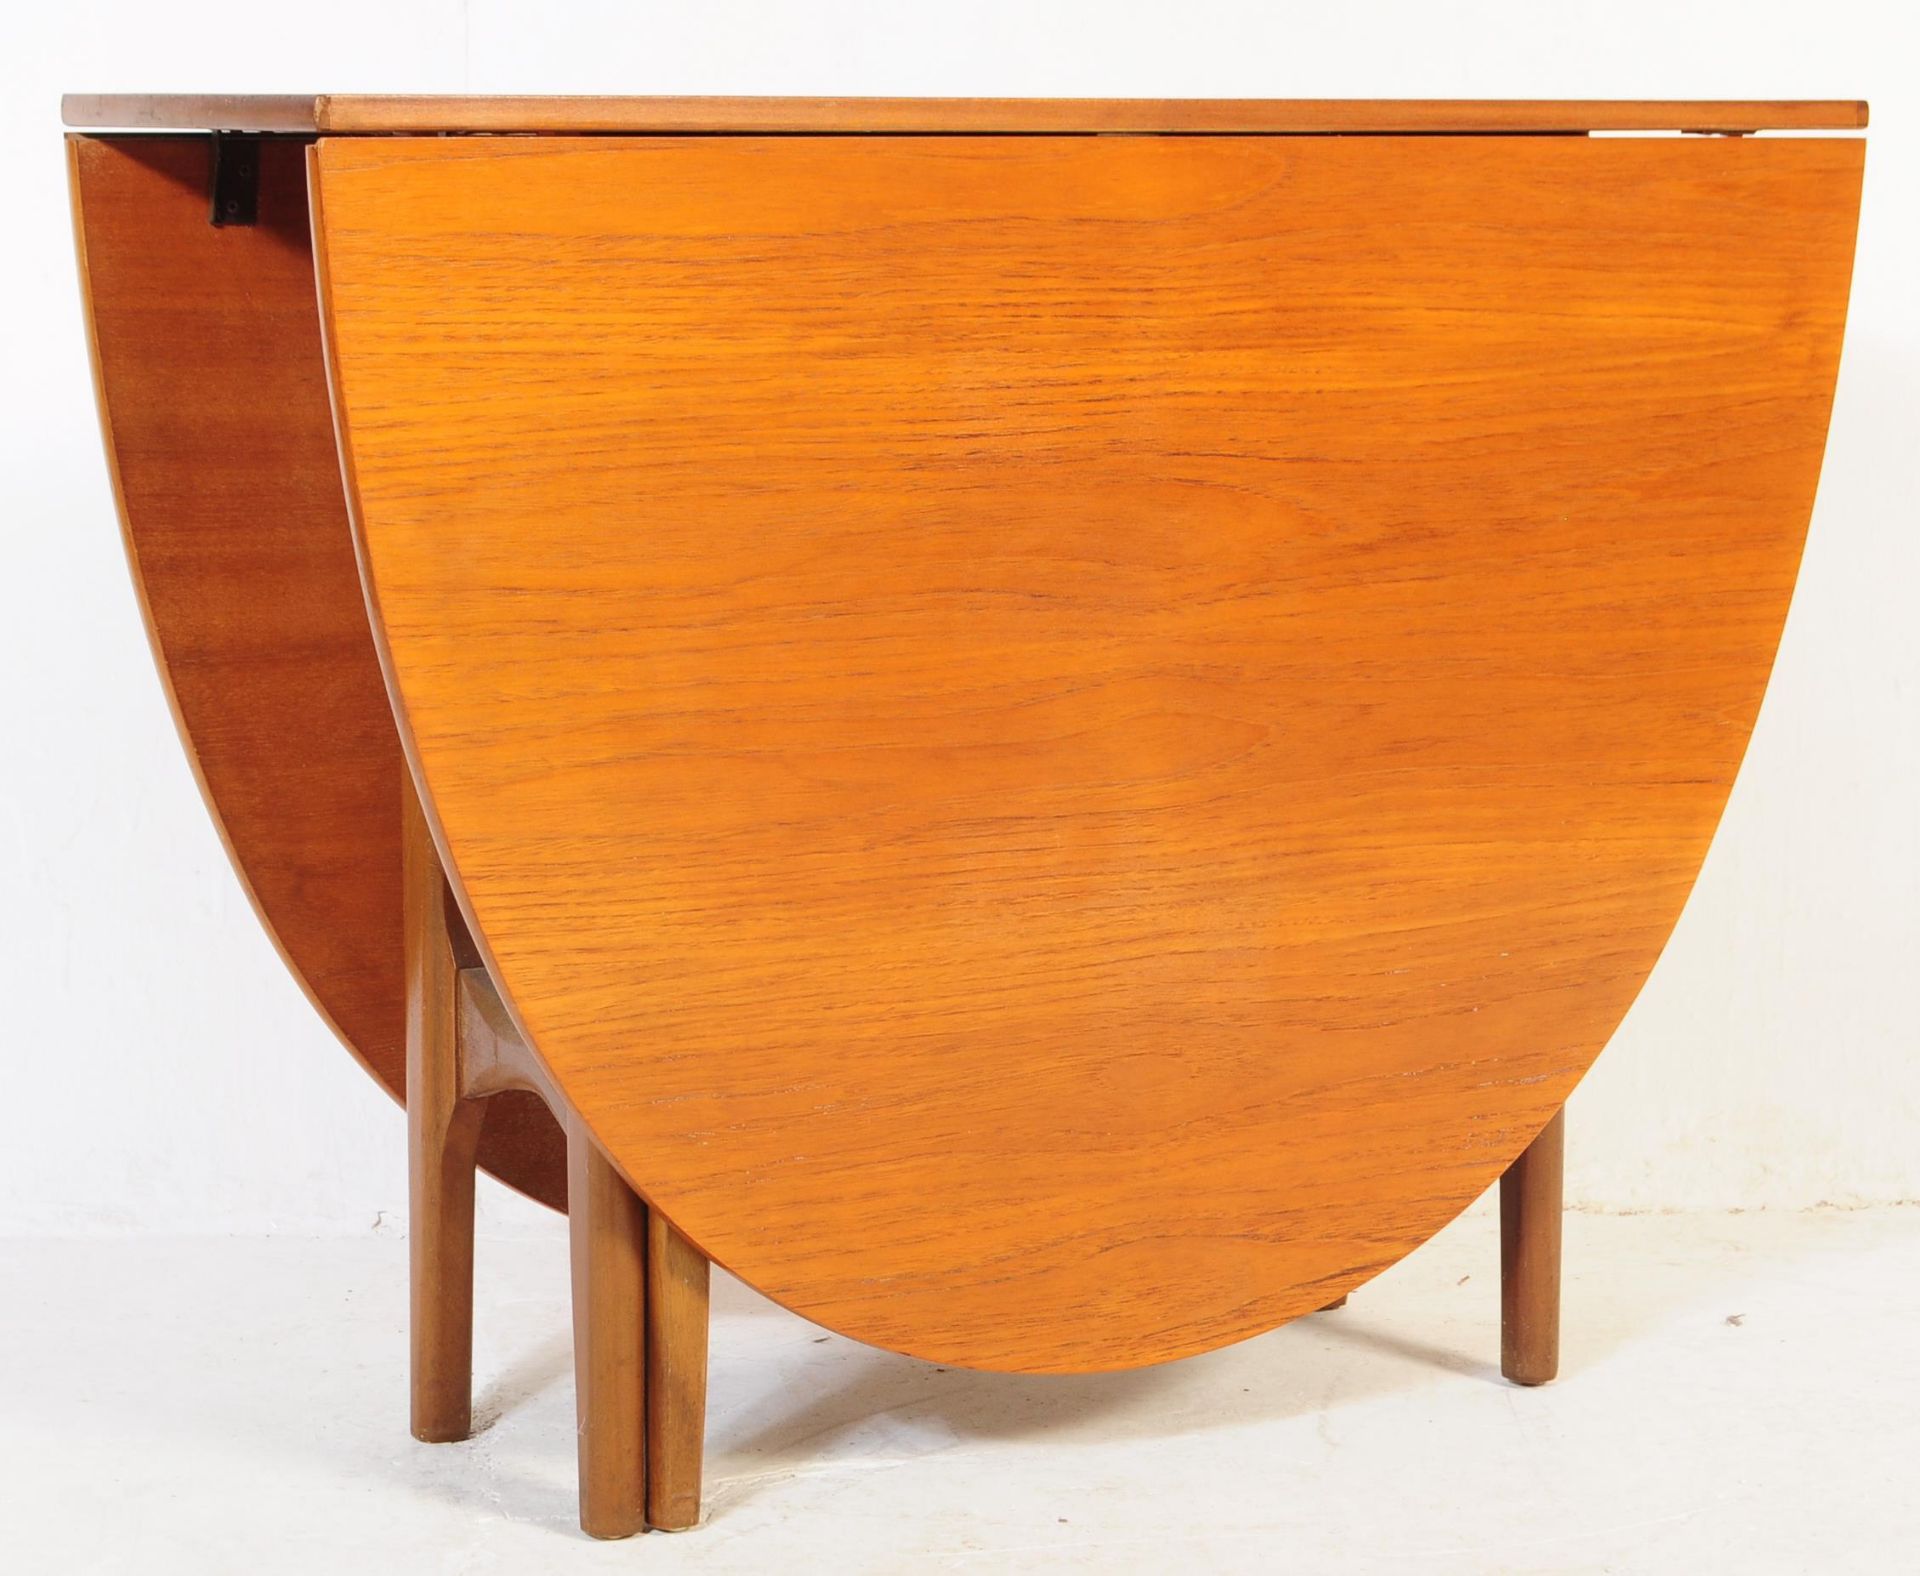 MID 20TH CENTURY RETRO NATHAN DROP LEAF DINING TABLE - Image 5 of 5